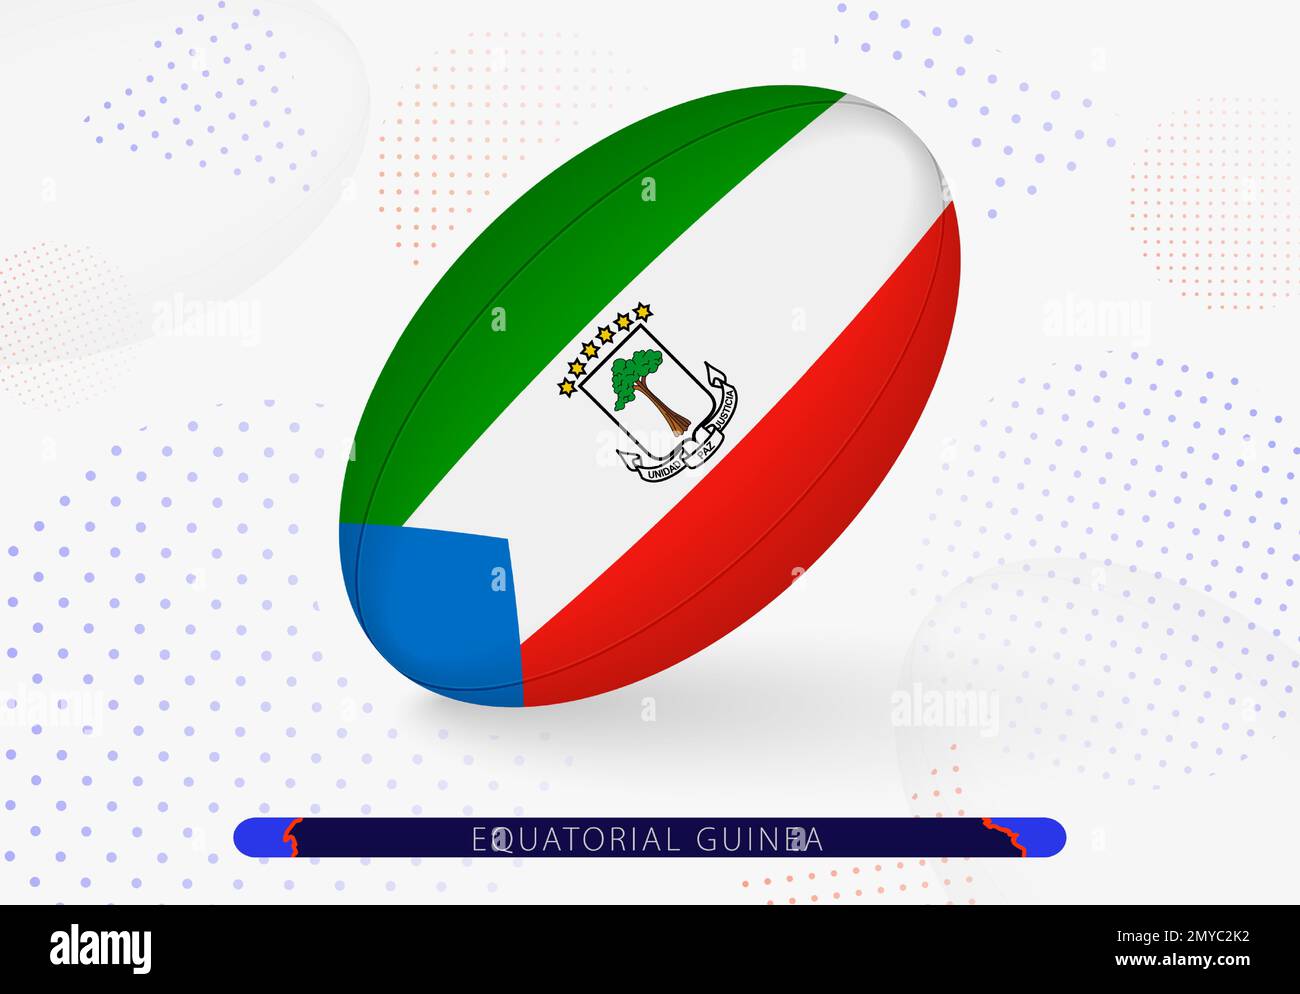 Rugby ball with the flag of Equatorial Guinea on it. Equipment for rugby team of Equatorial Guinea. Vector sport illustration. Stock Vector